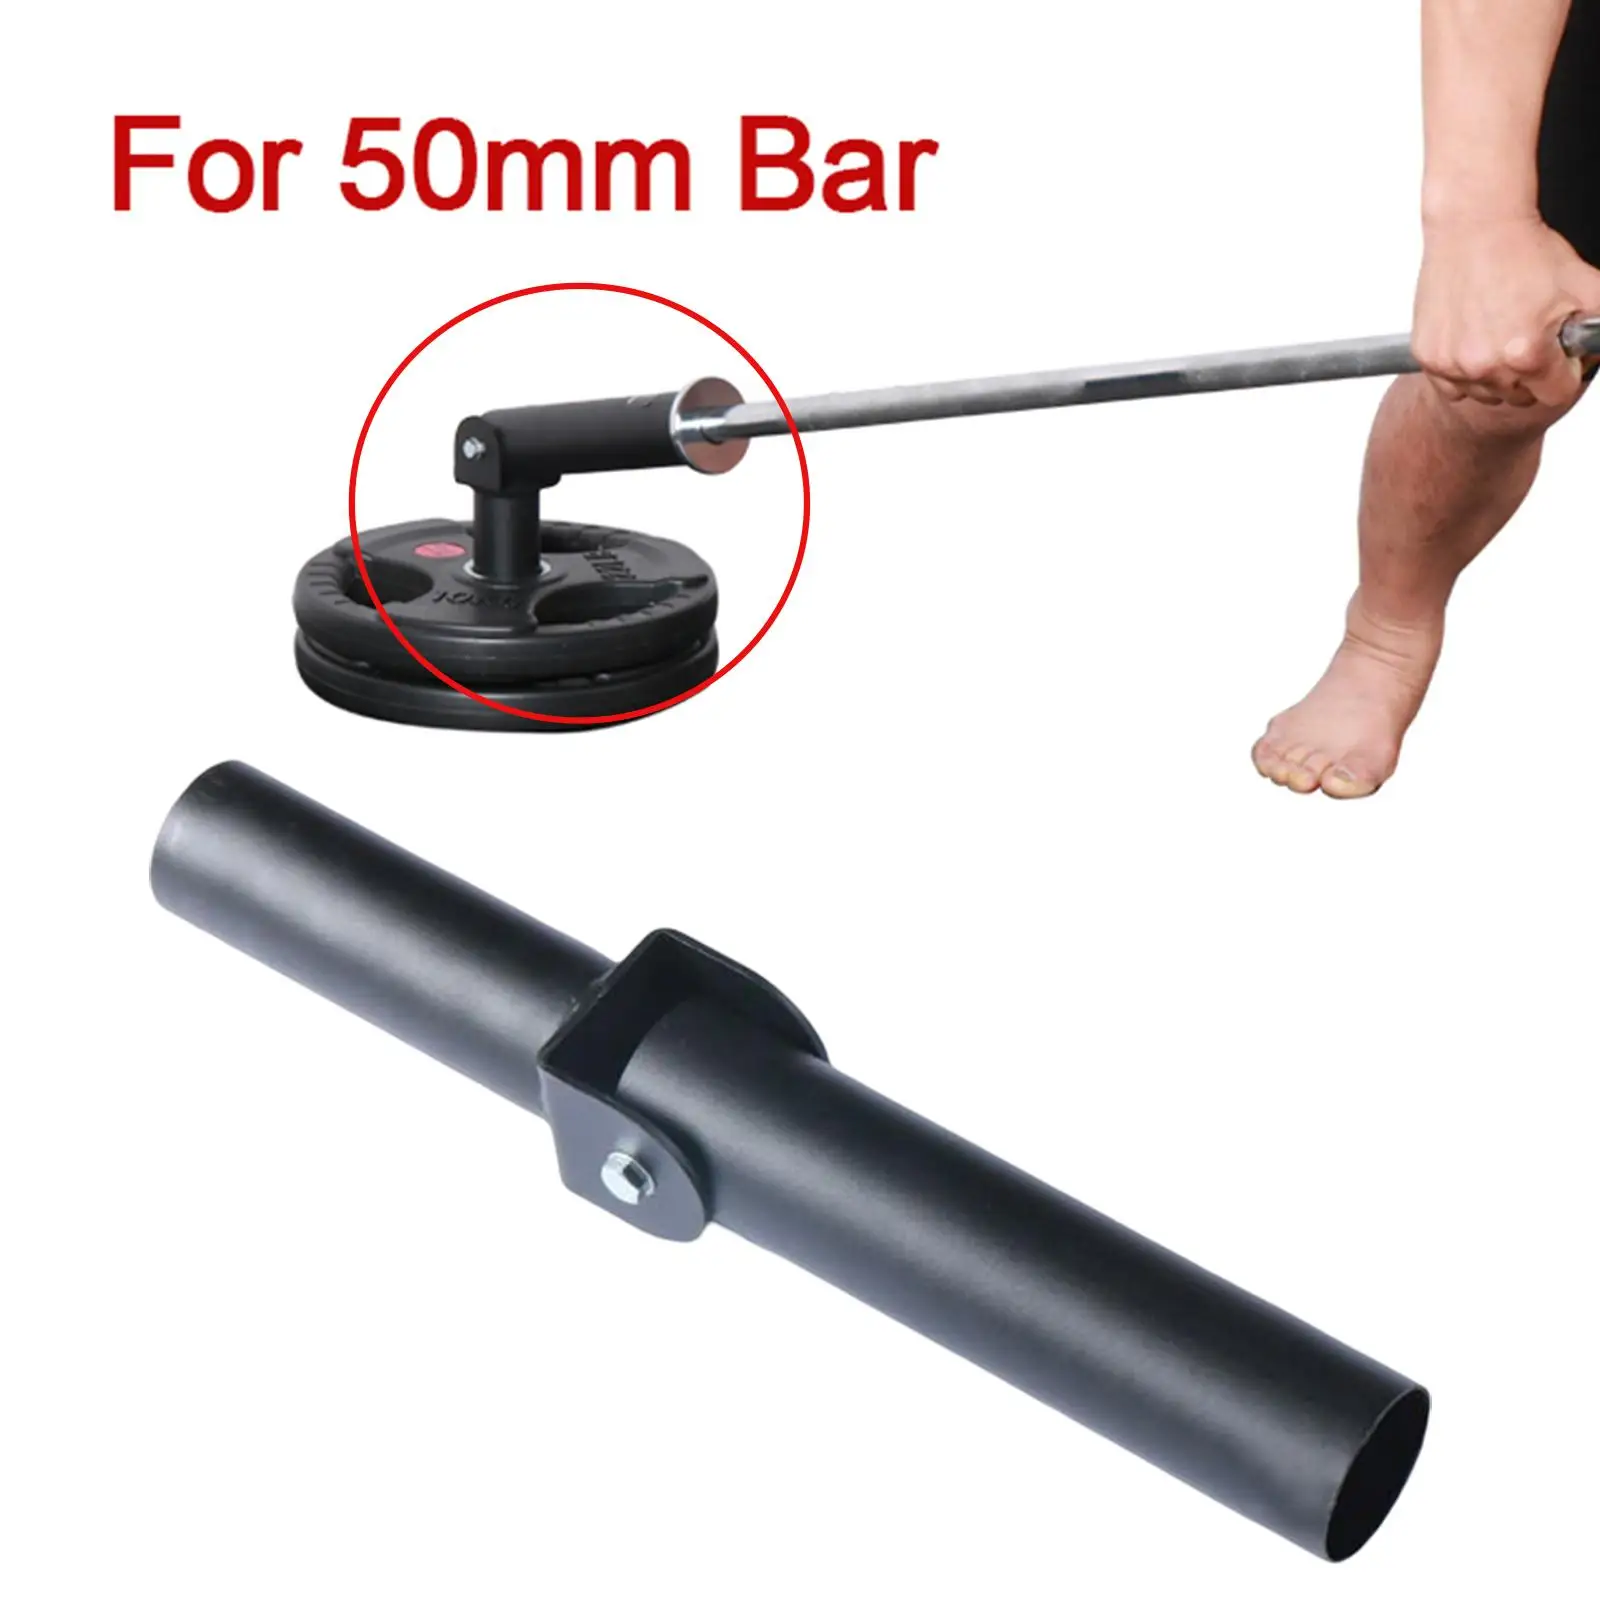 T Bar Row Plate Post Insert Landmine Barbell Attachment Easy to Install Multifunctional for Exercises Gym Fitness Home Deadlift